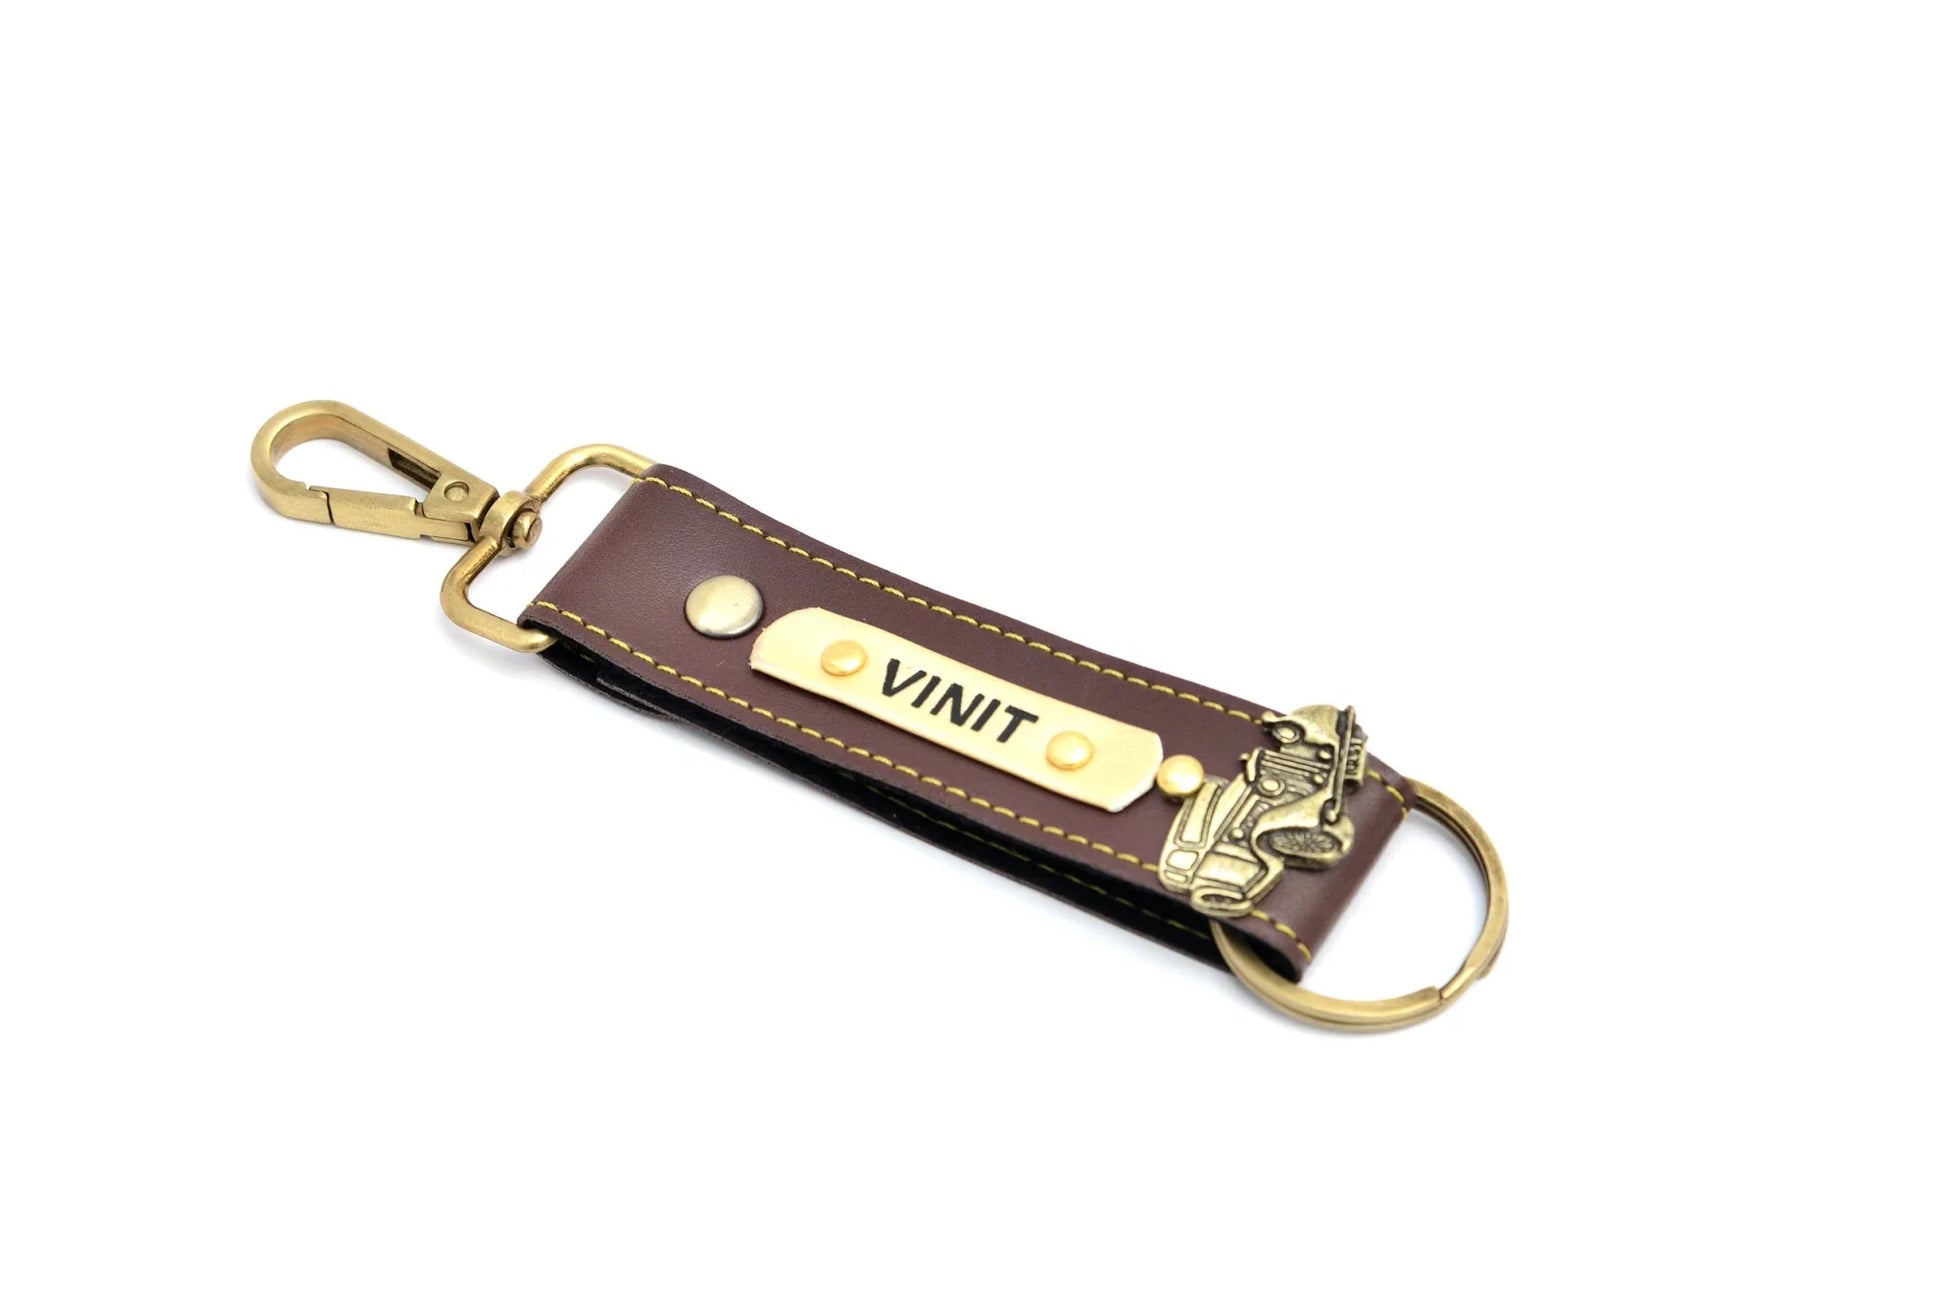 Why settle for a random keychain you are not 100% happy with when you can get your very own premium quality Custom leather Keychain! After all, it is the smallest of details that make you stand out in the crowd!  